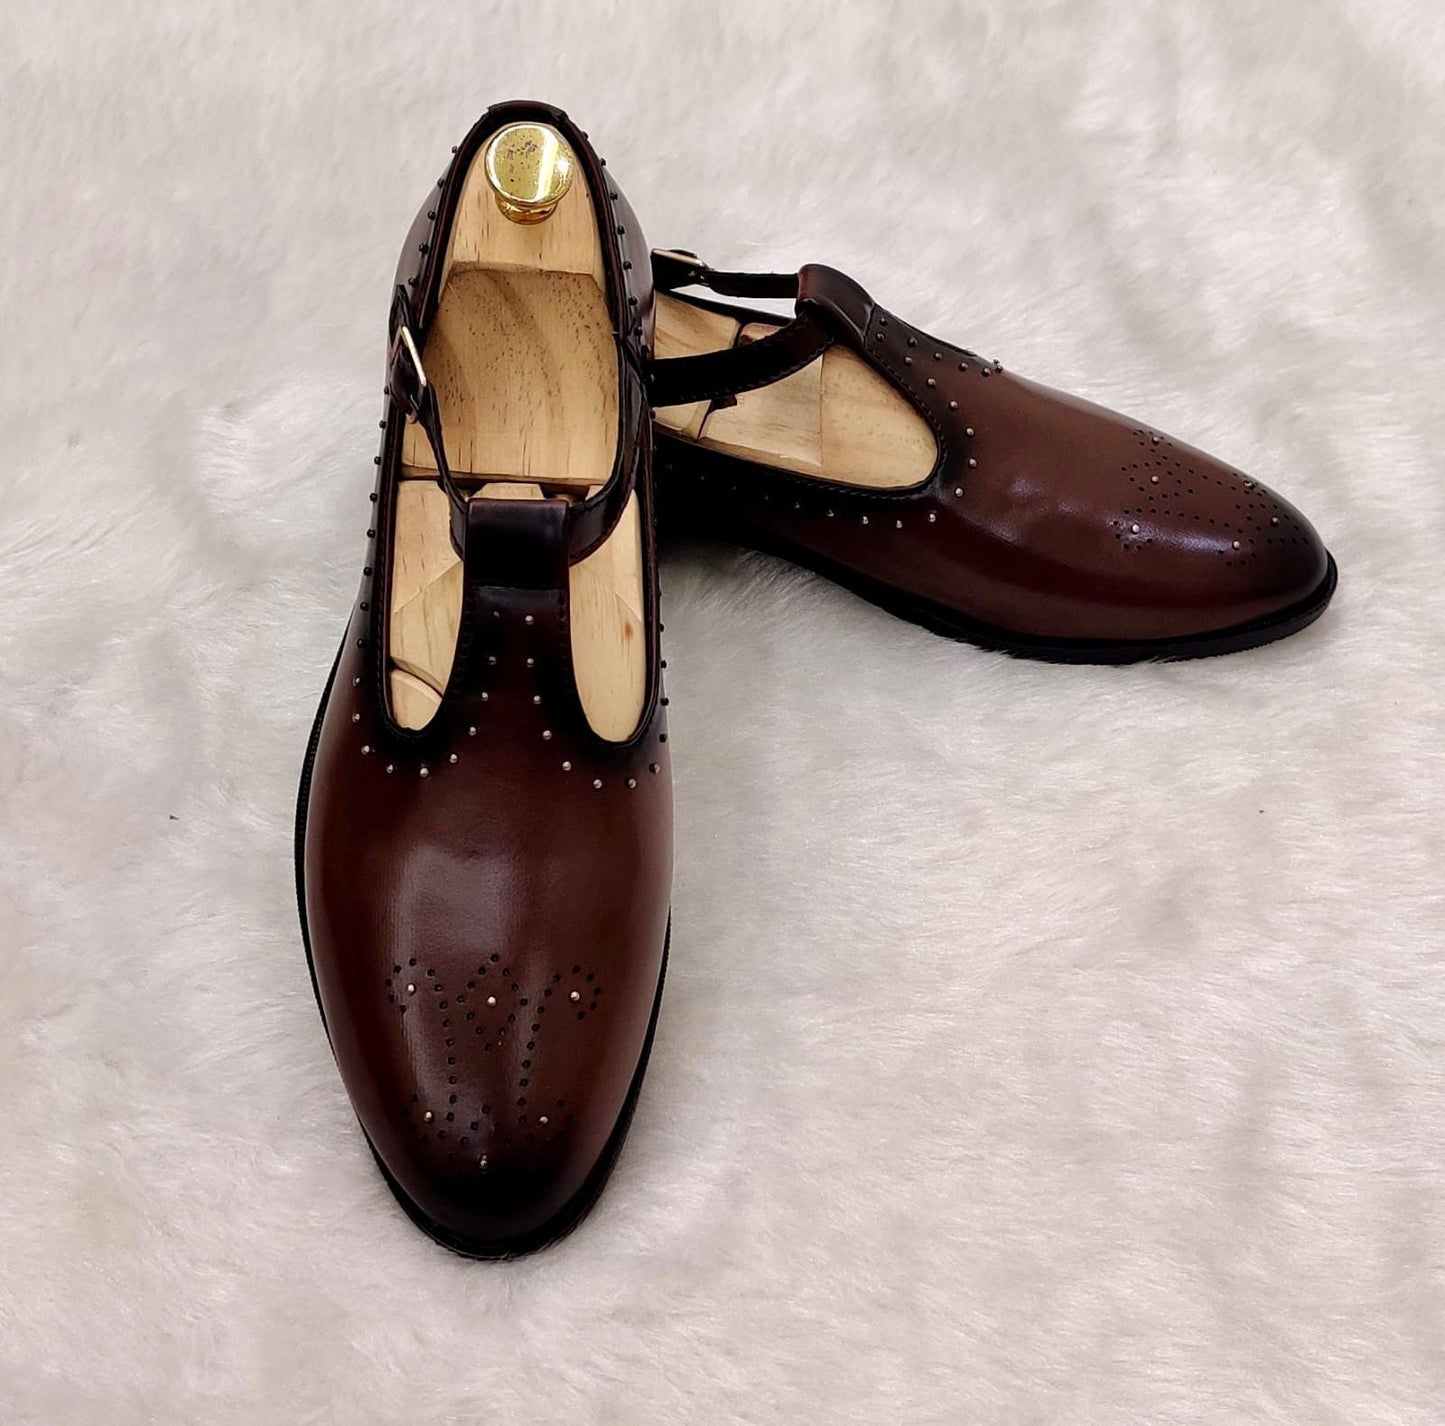 Fashion Suede Peshawari Shoes For Party Wear And Casual Wear-JonasParamount